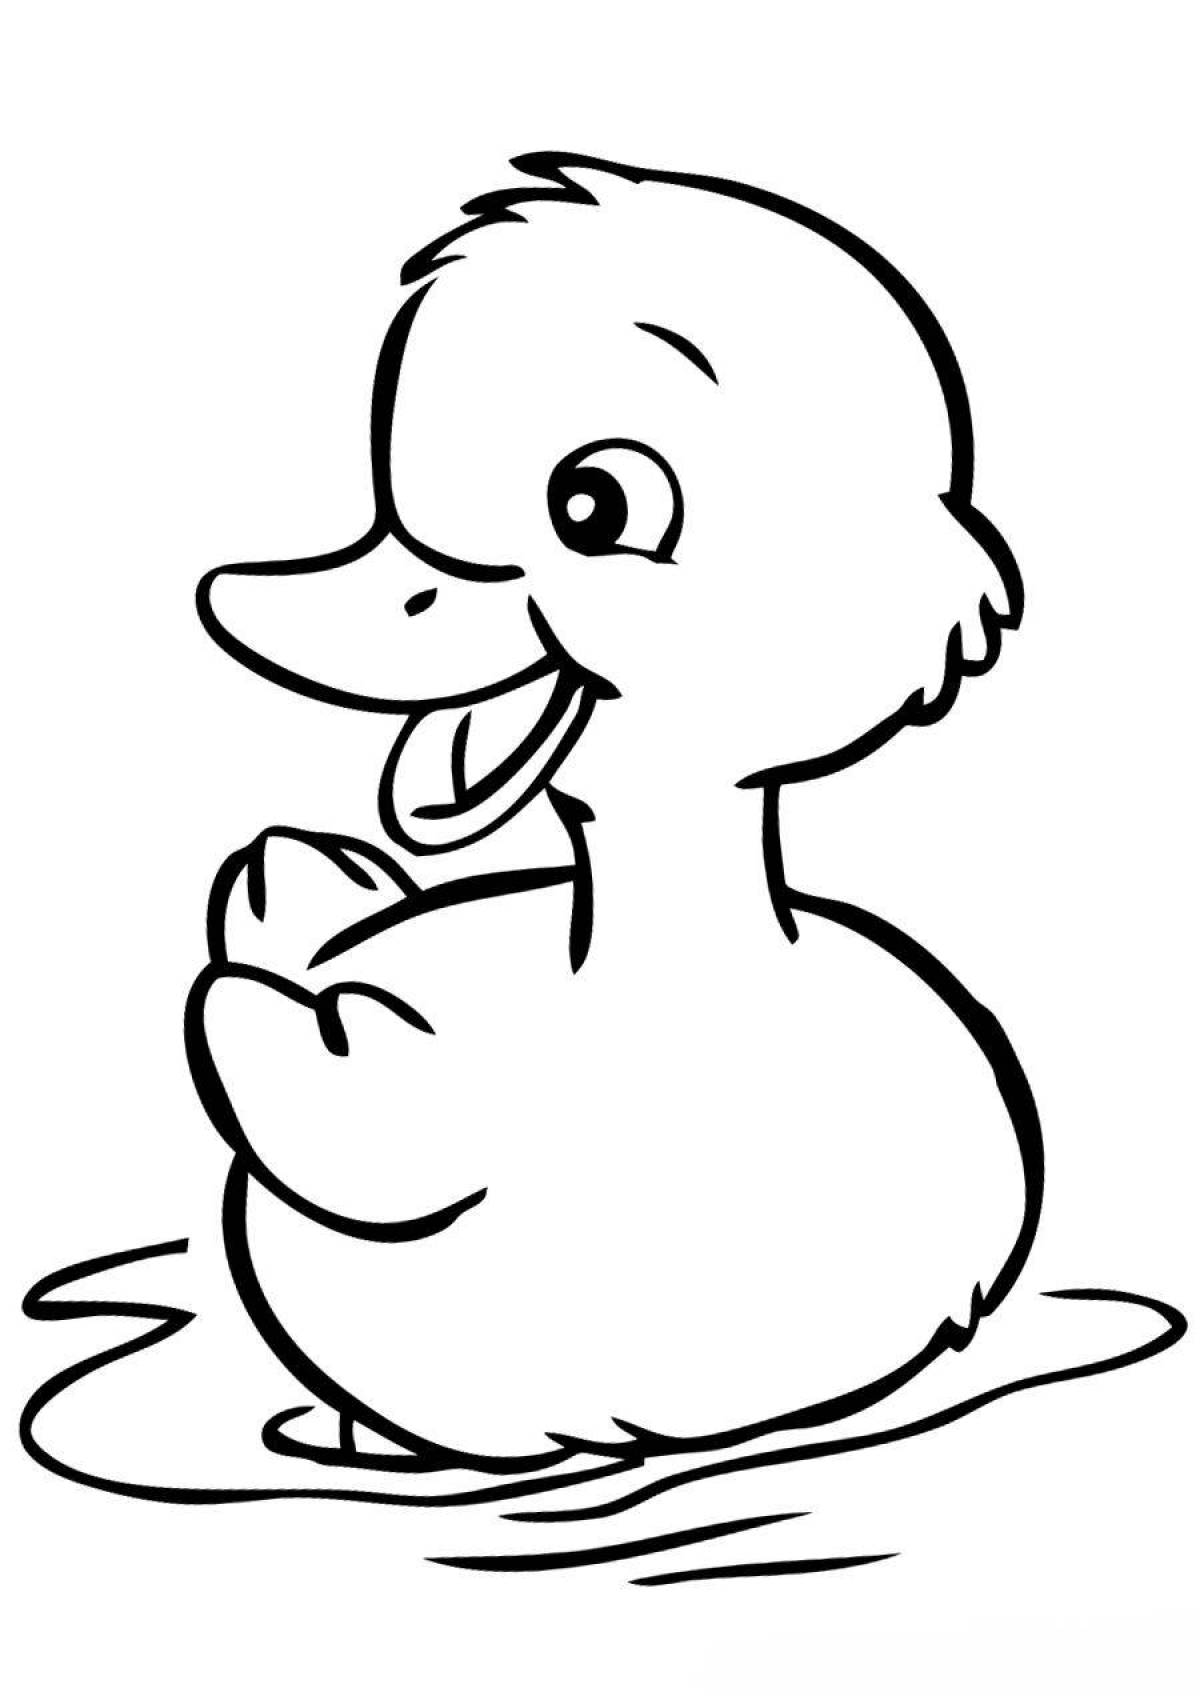 Playful dressed duck coloring page